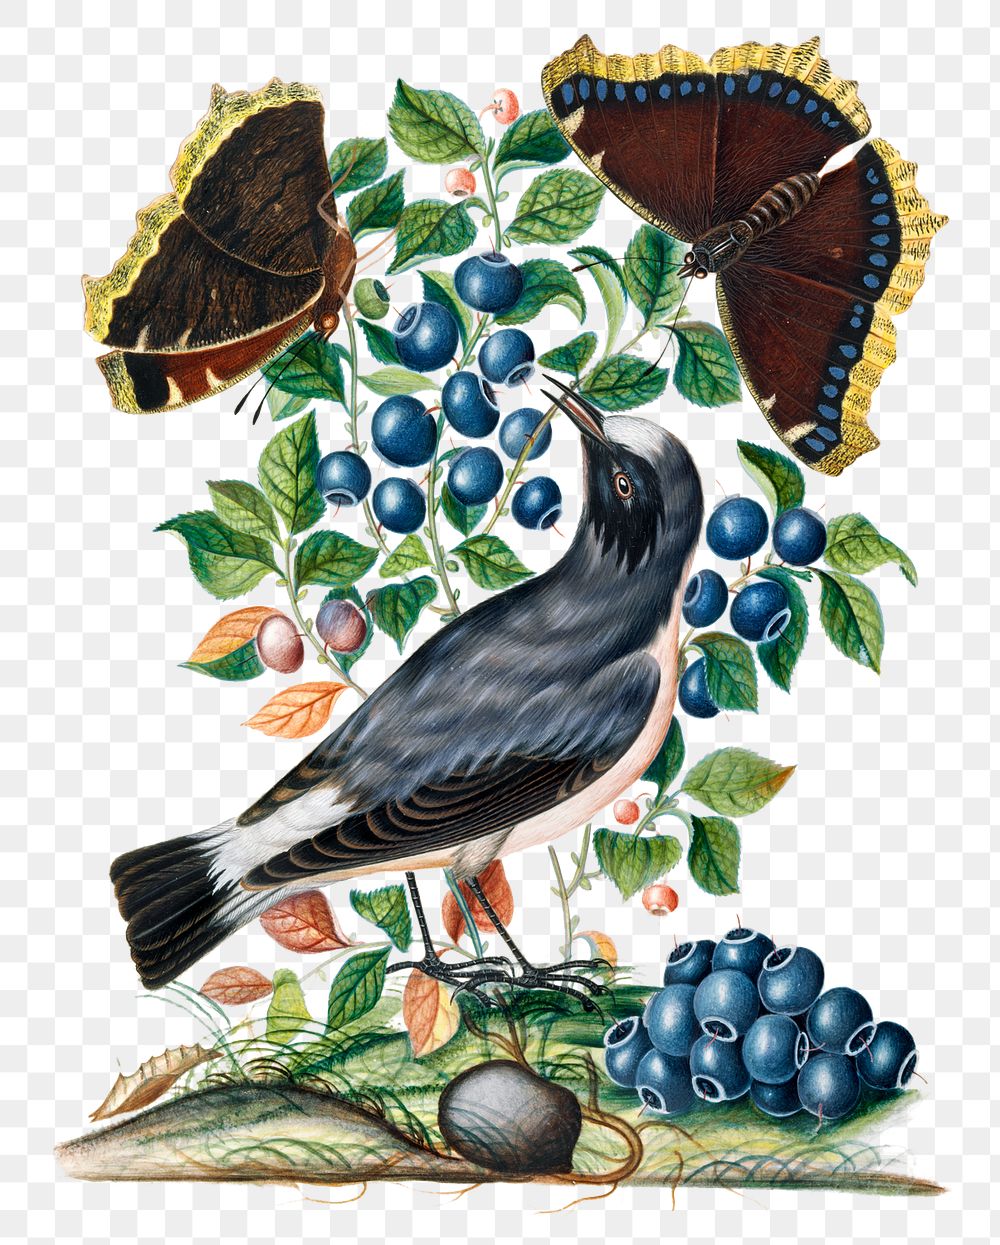 Bird png sticker, bilberry plant, watercolor painting, remixed from artworks by James Bolton